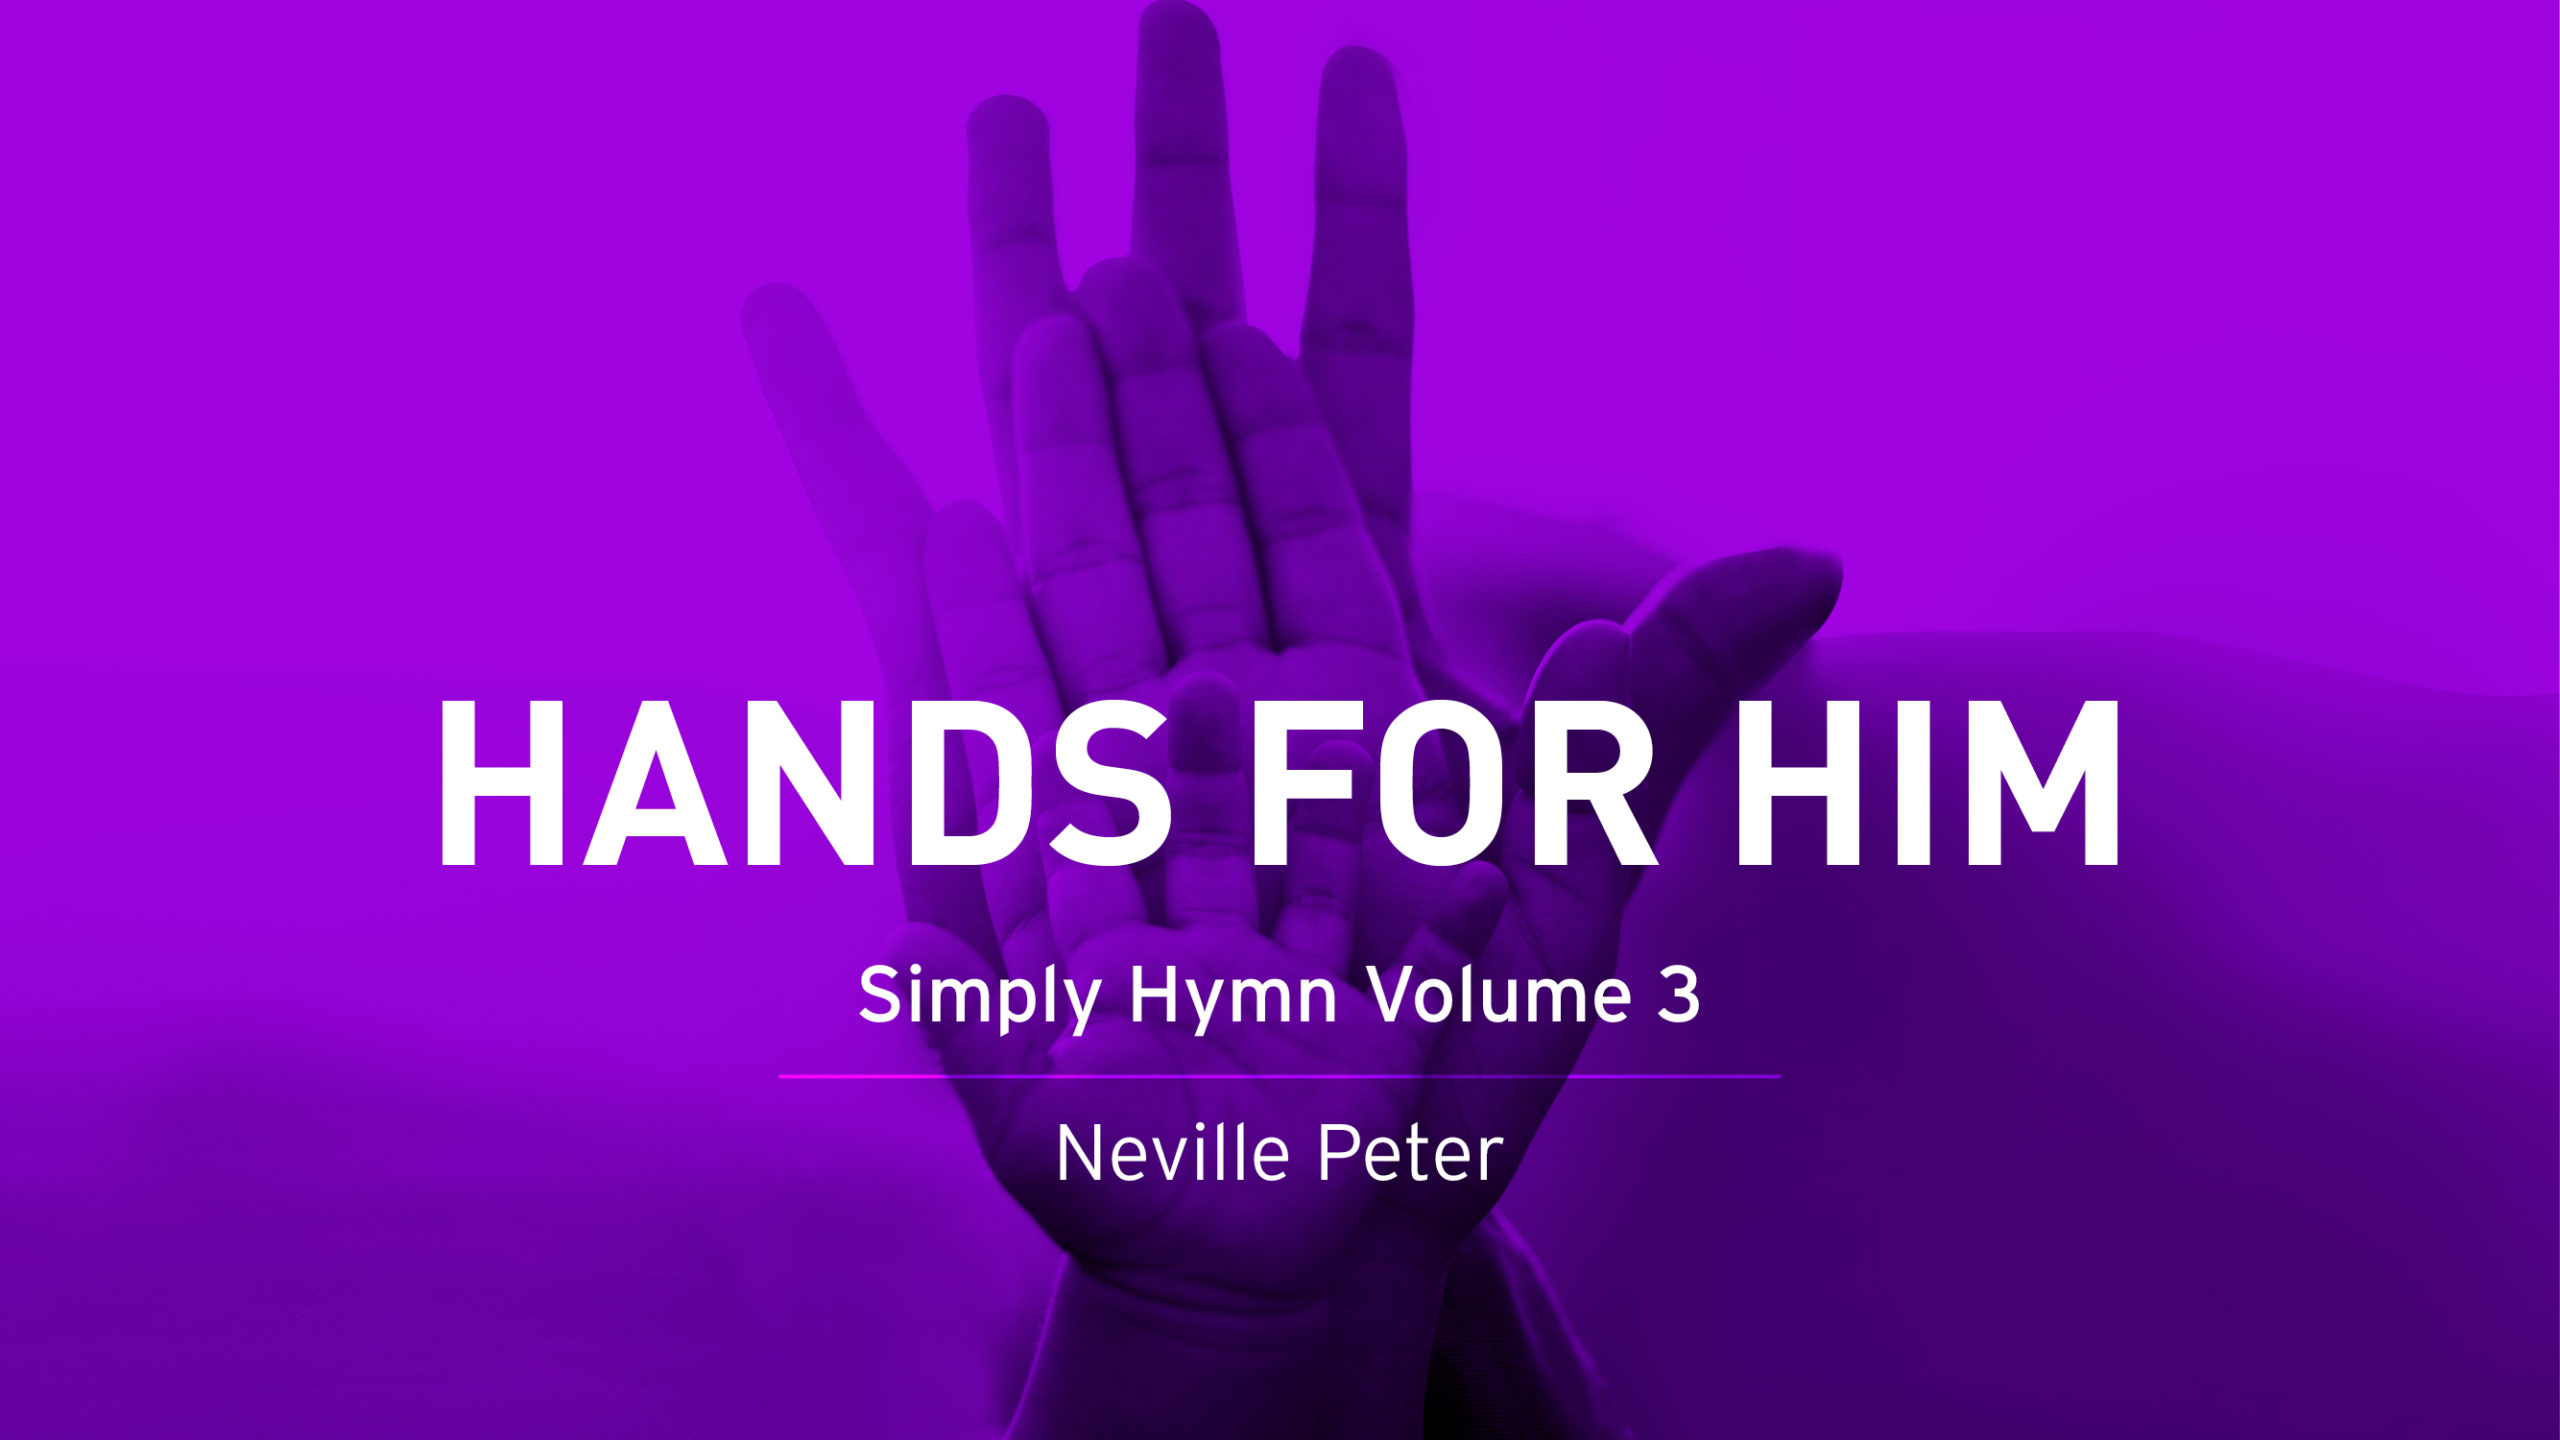 Simply Hymn Volume 3 Hands For Him